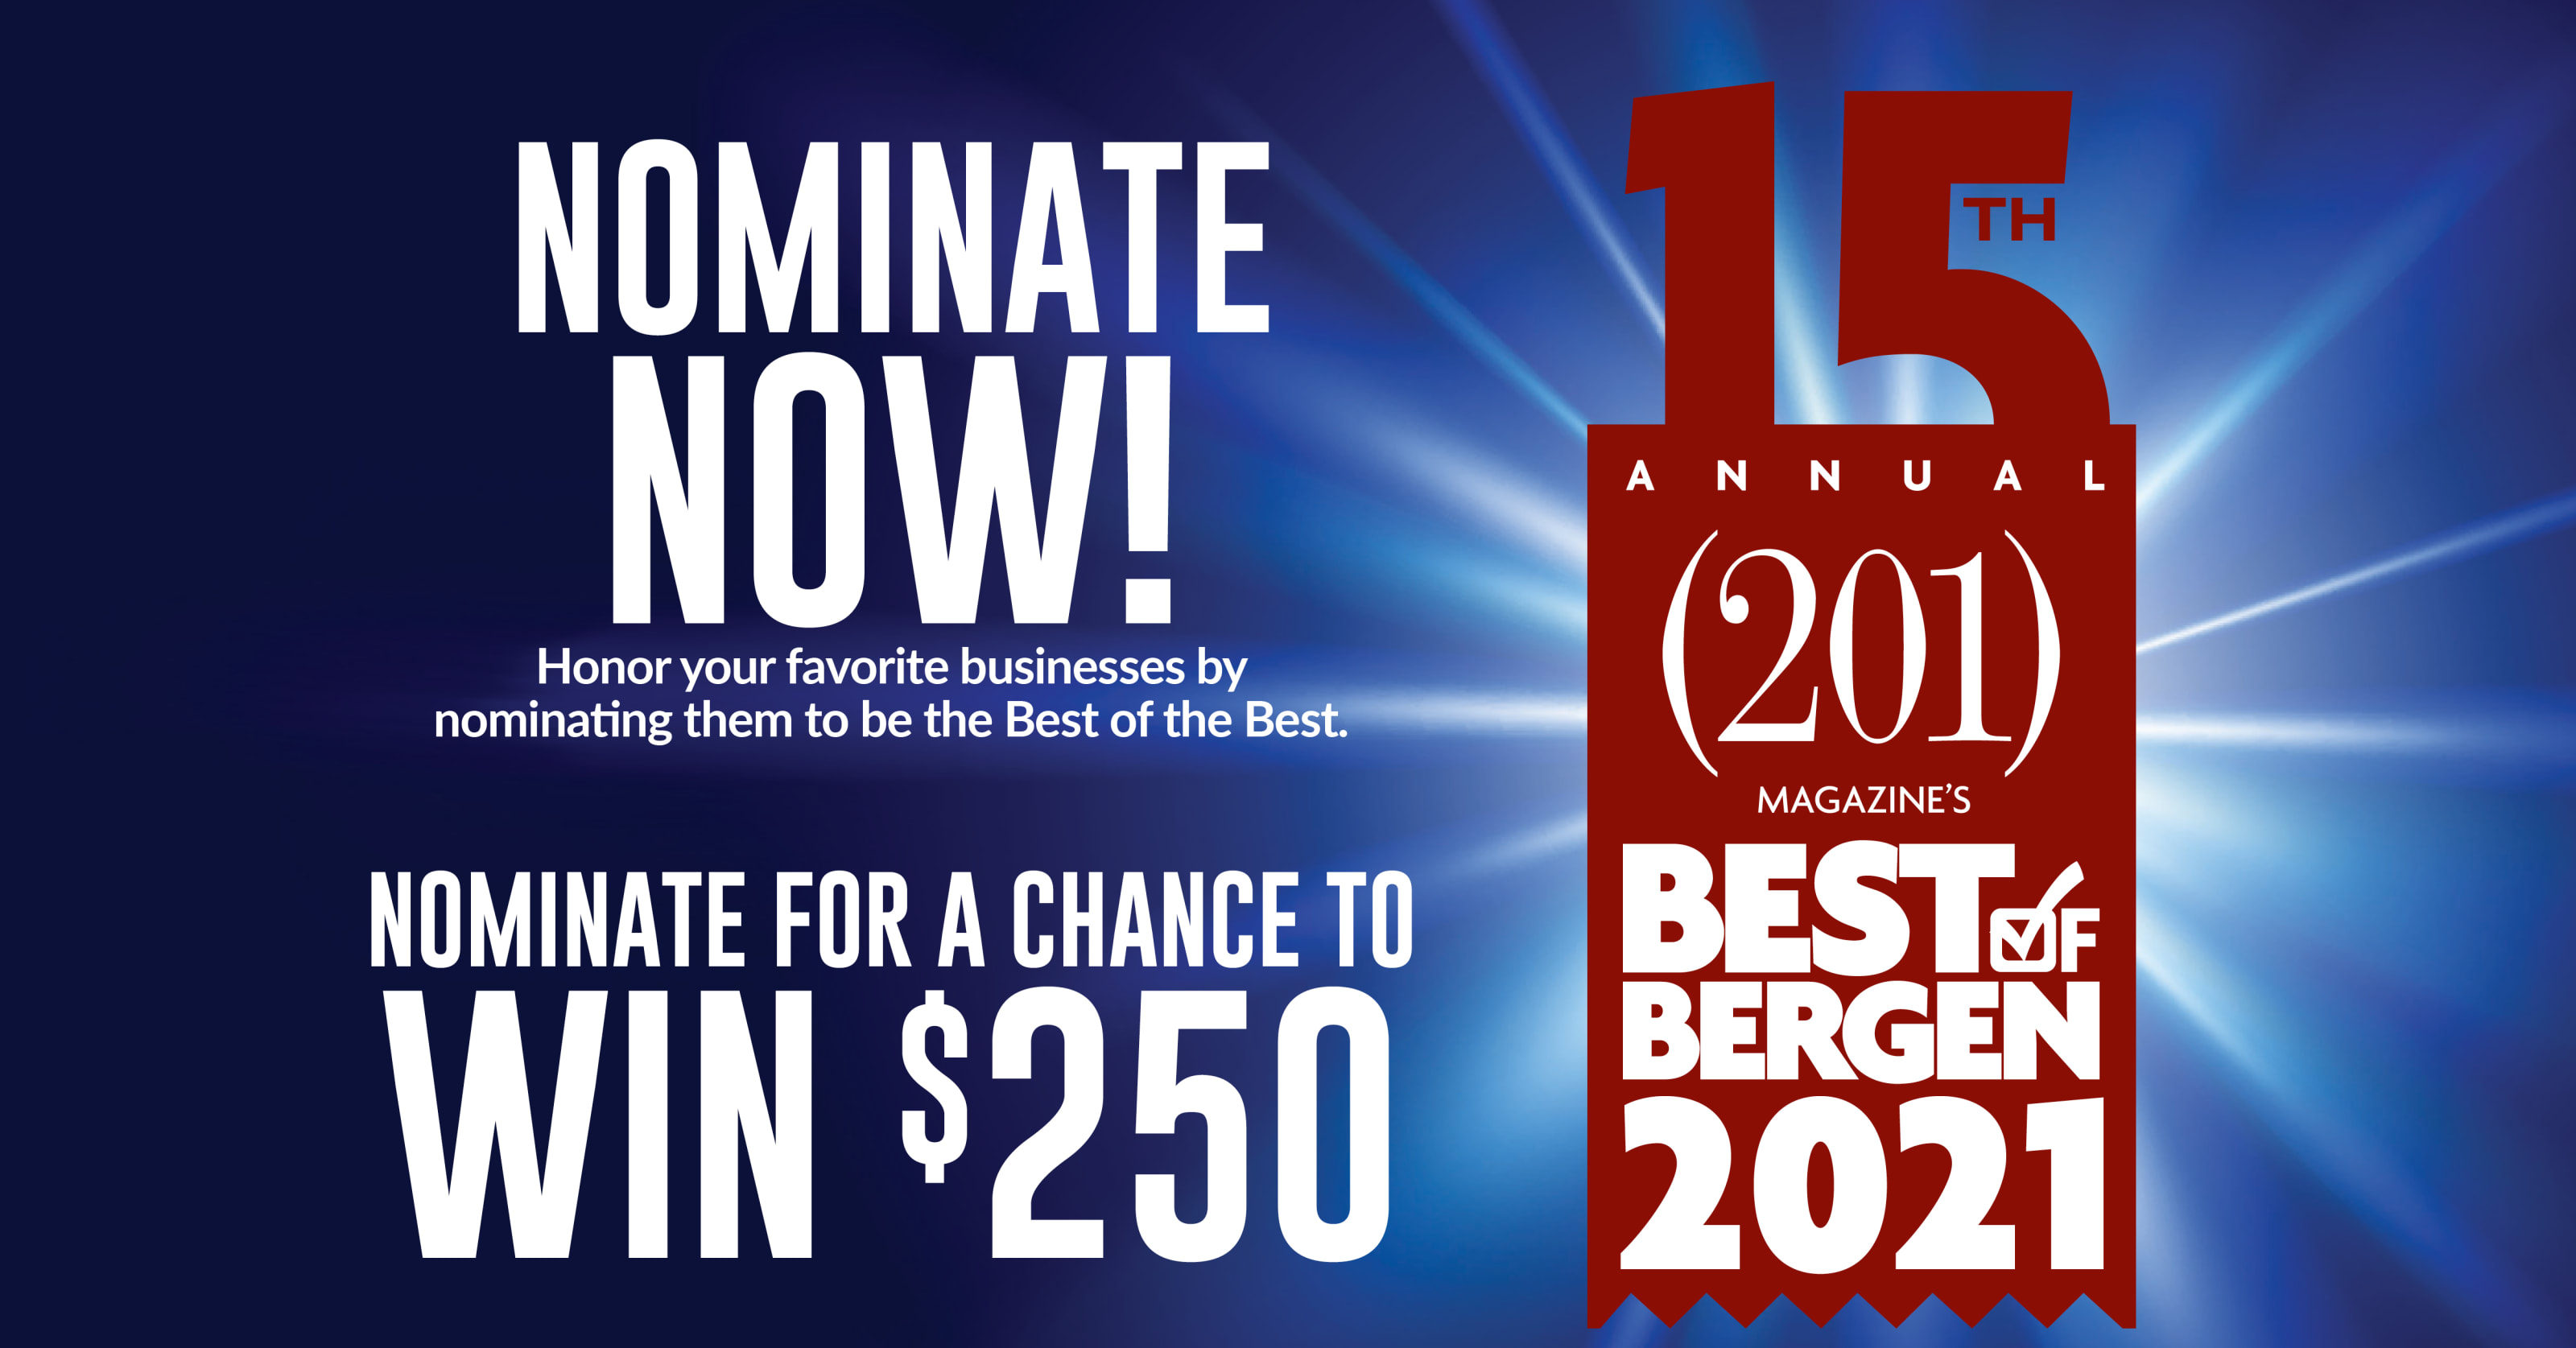 Best Rss Feeds 2021 Best of Bergen: Nominate your favorite businesses to be the Best 